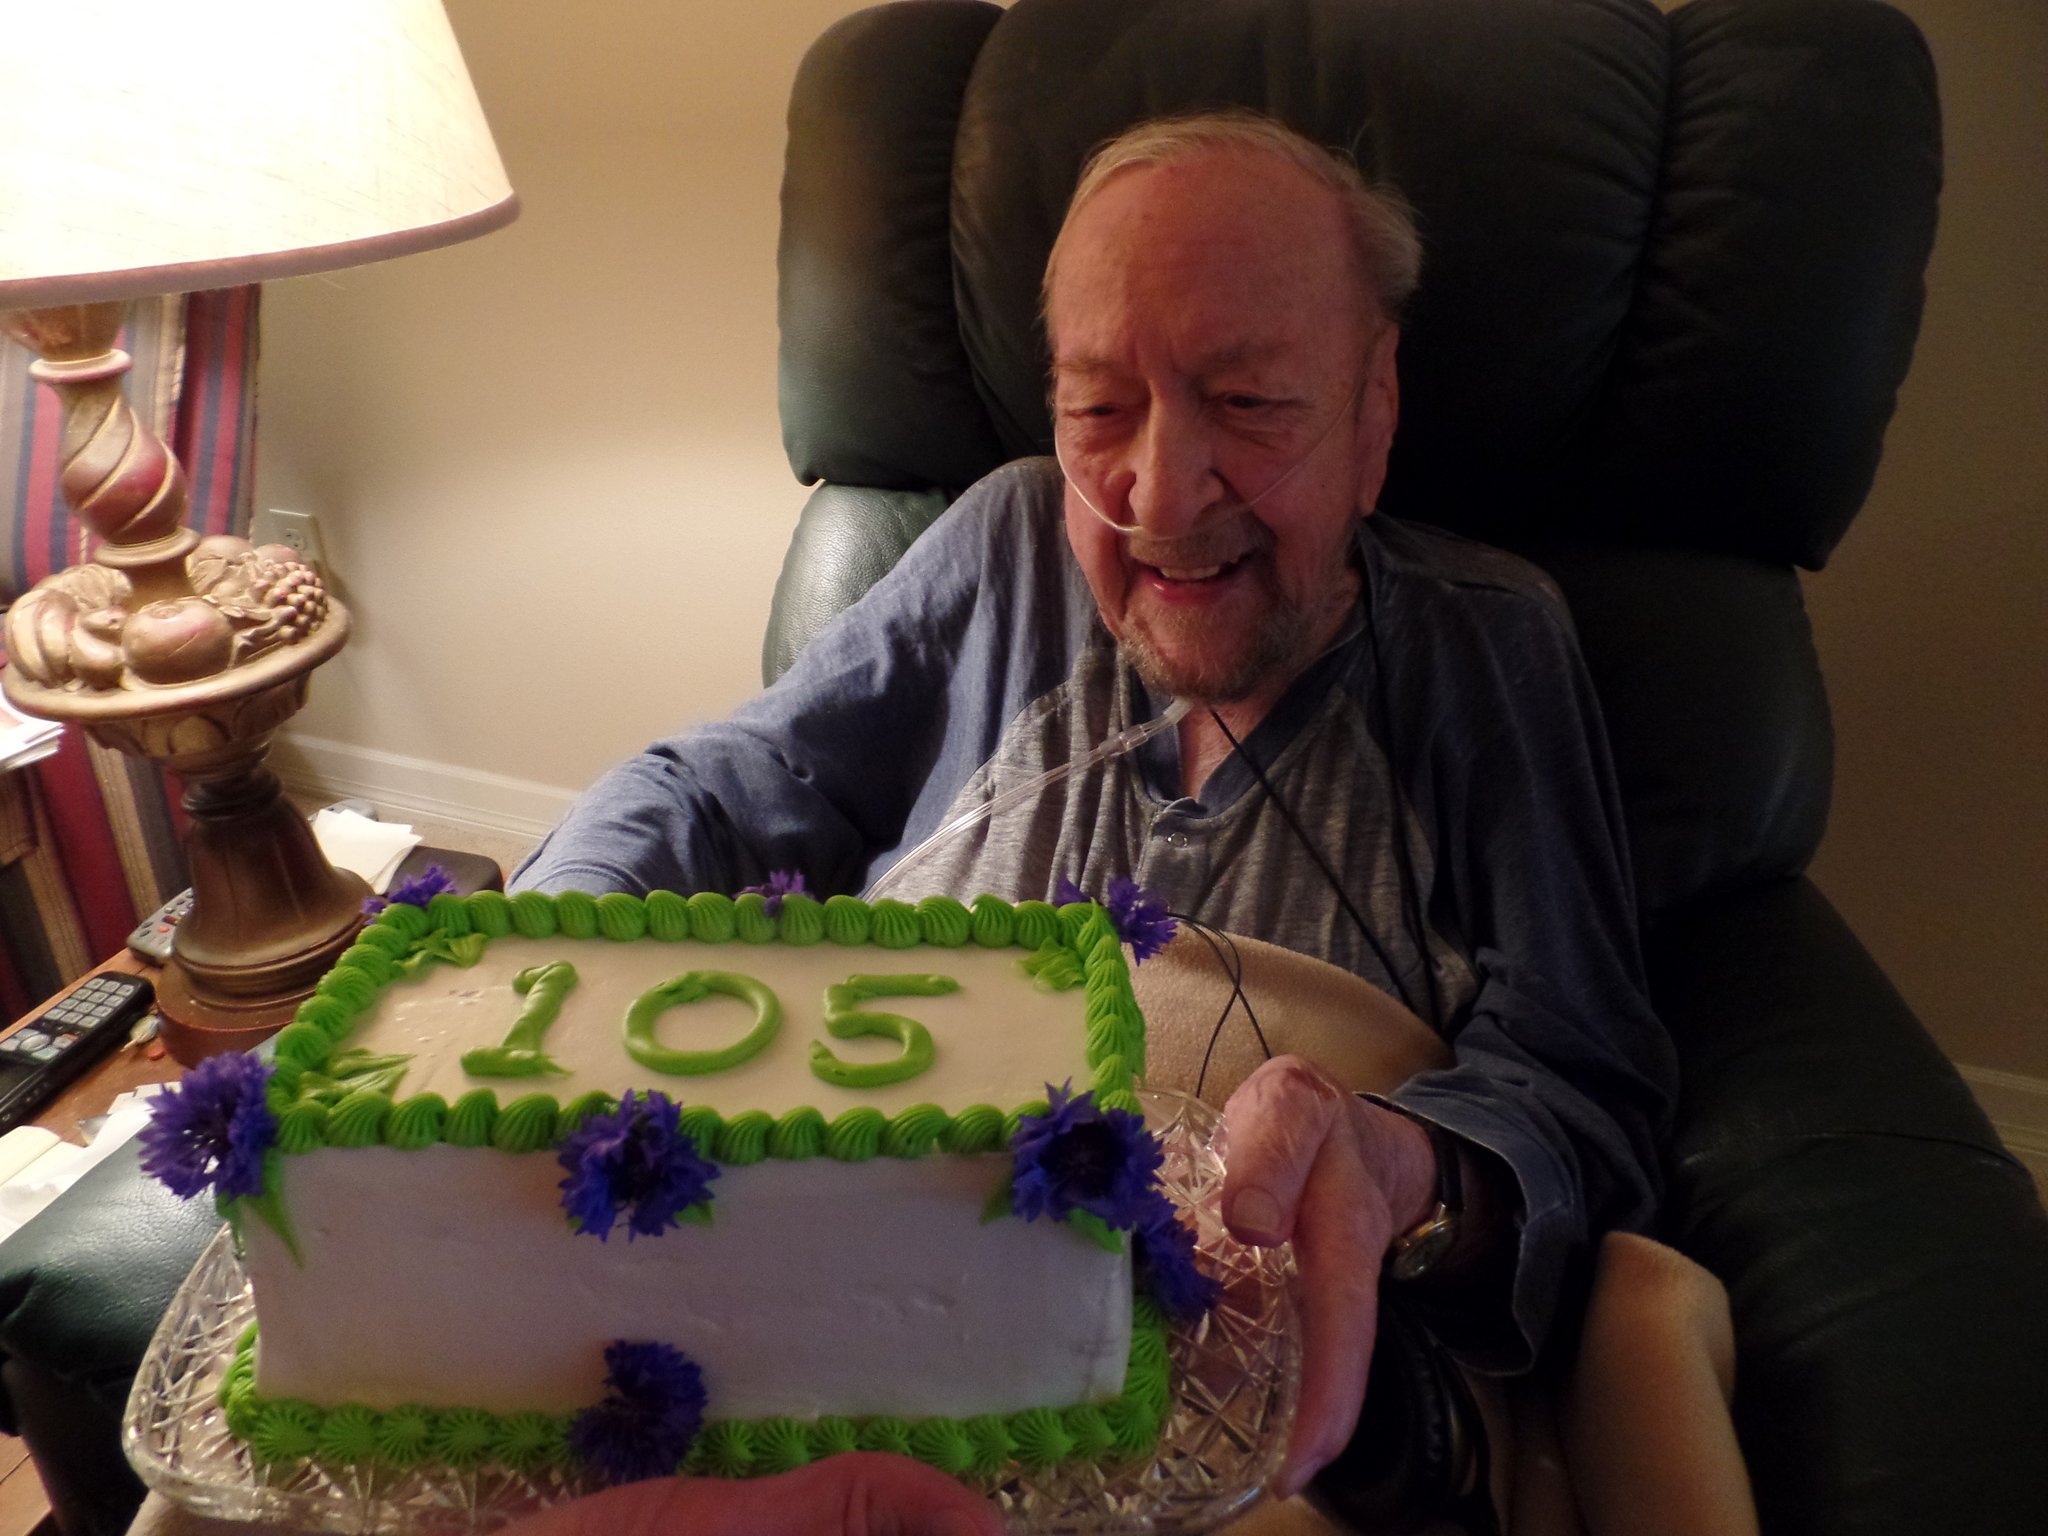 Kern Hendricks celebrates his 105th birthday with a special cake at Fairwinds Redmond.